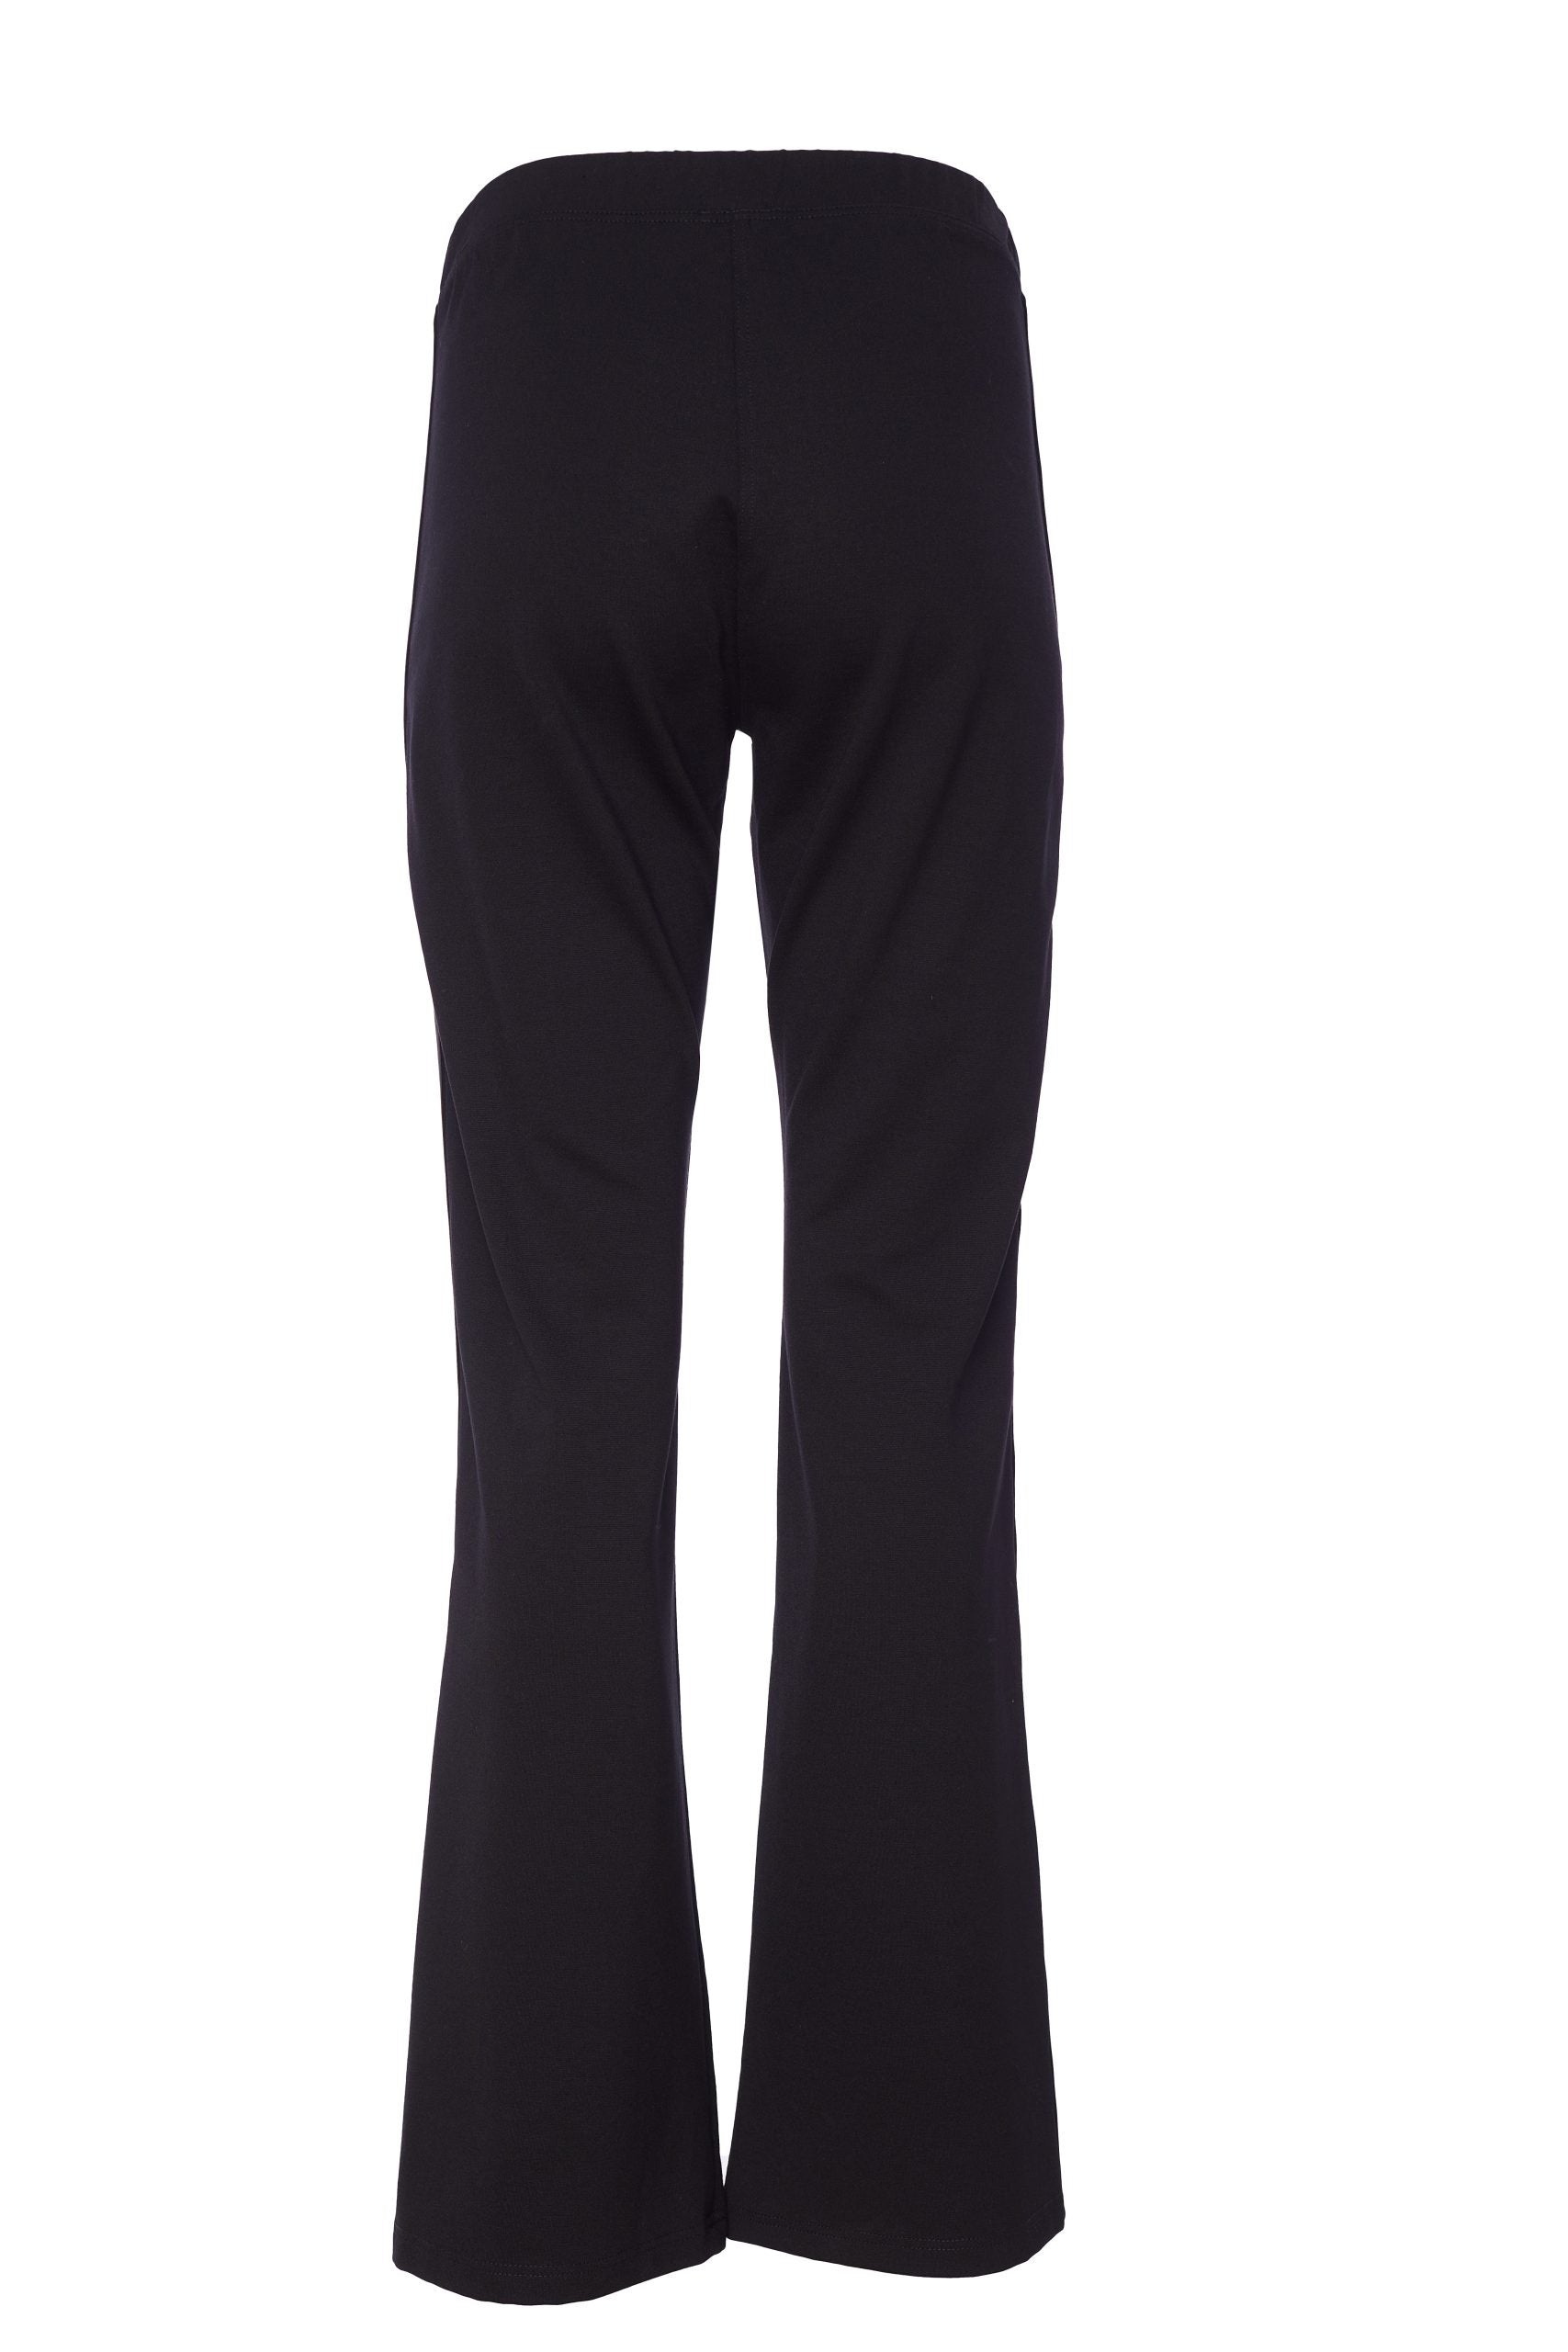 Flare Trouser with Trim in Black/White